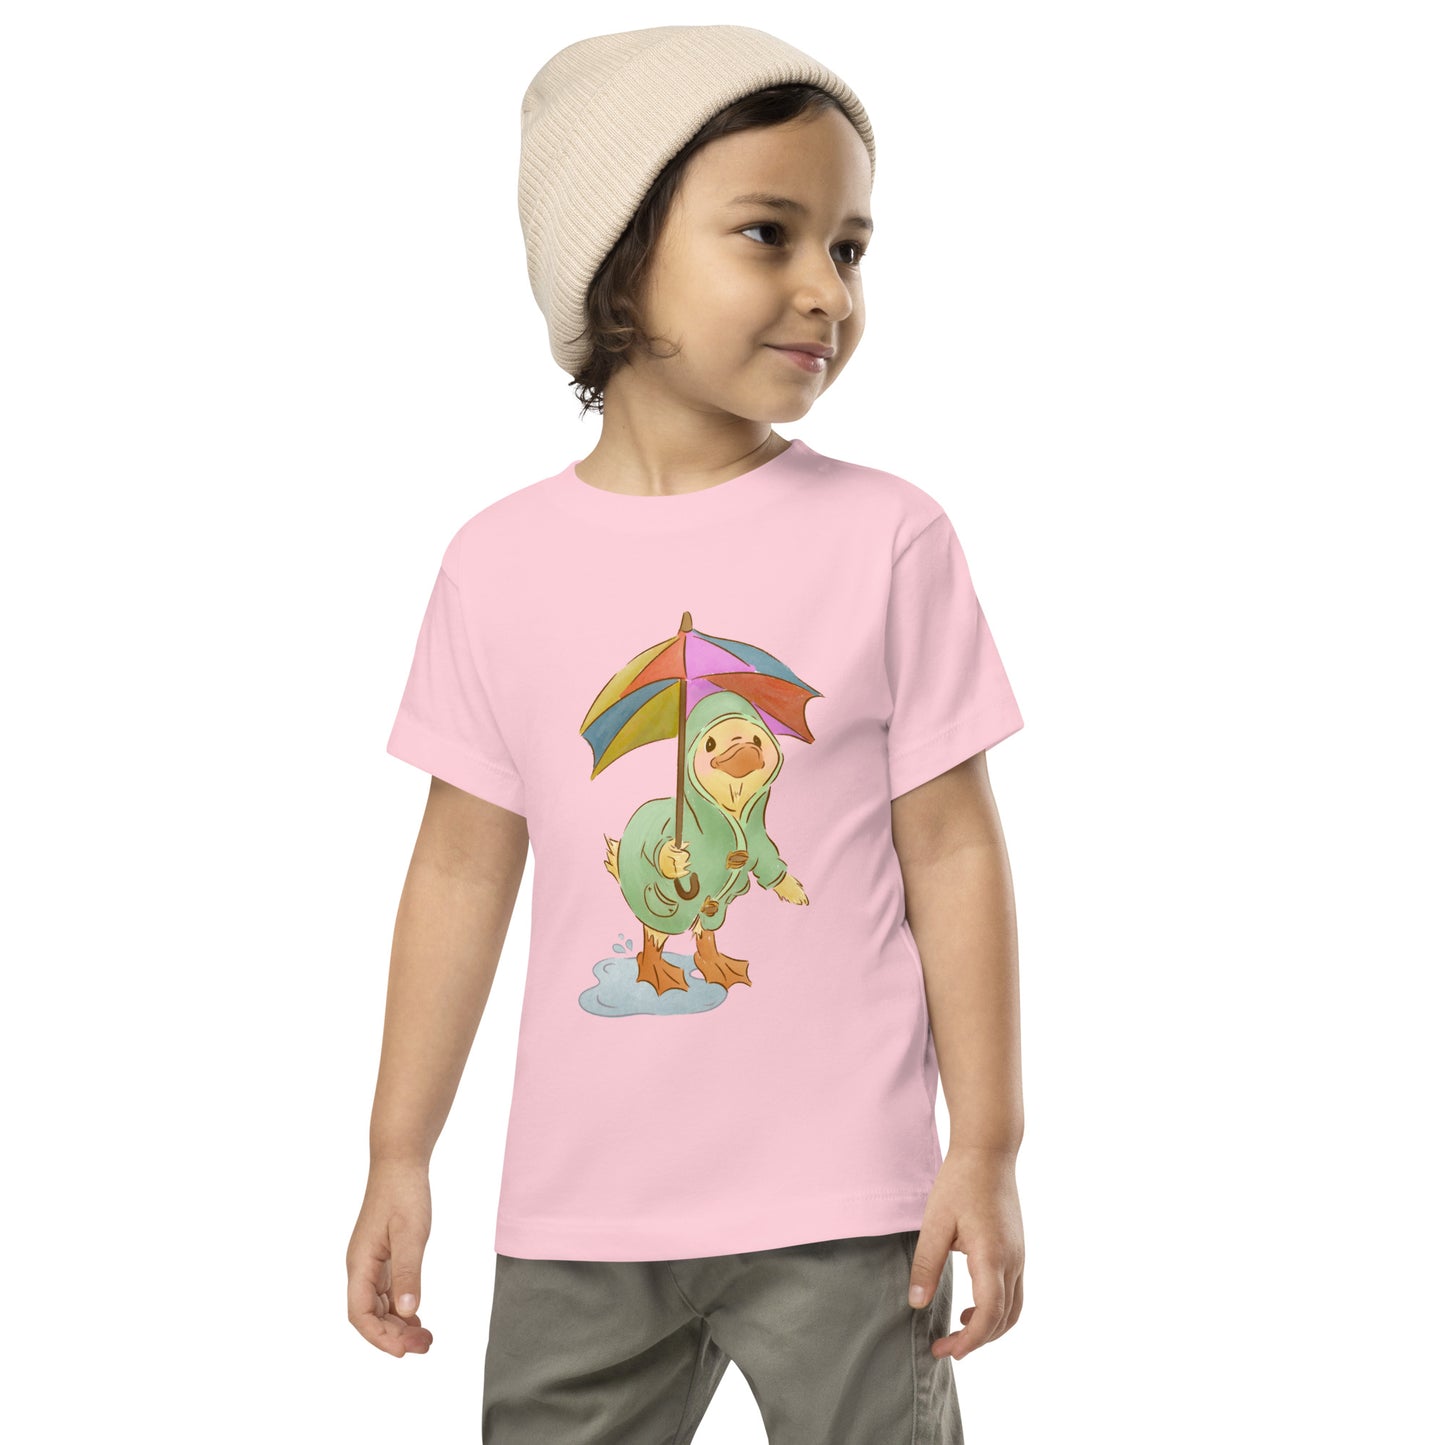 Mr Puddle Duck : Rainbow : Toddler Tee